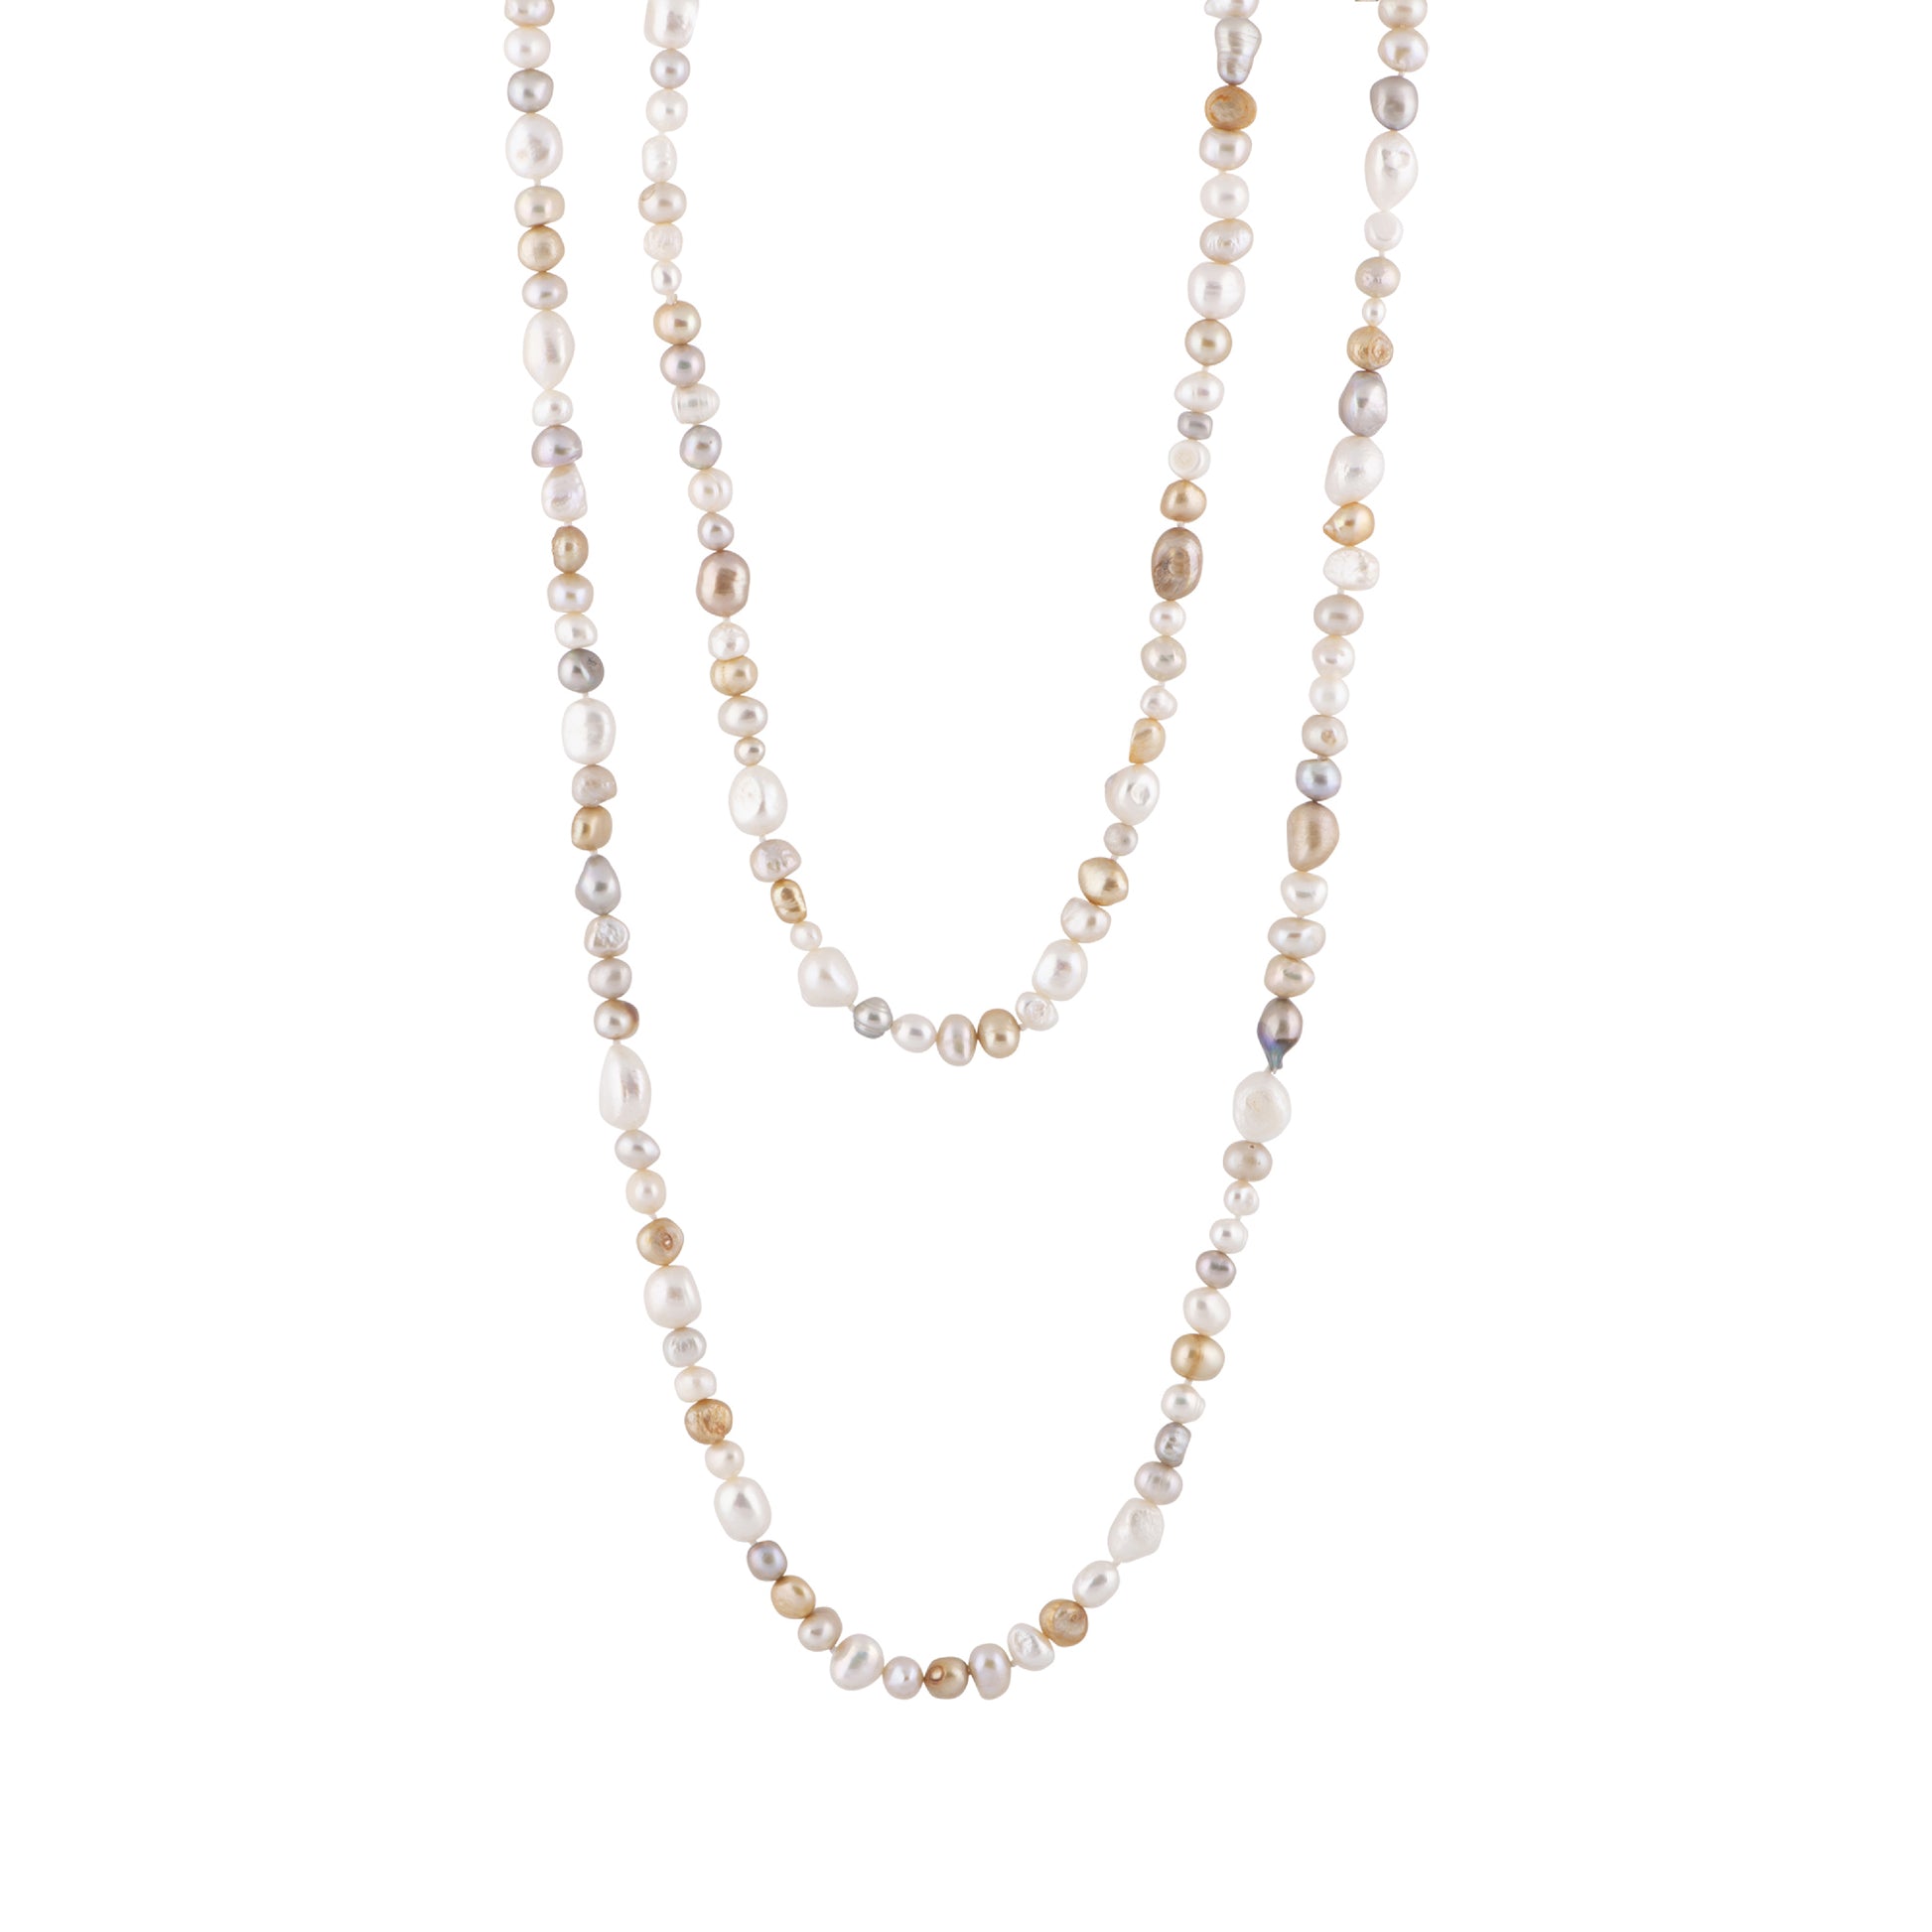 Allison - Long freshwater white pearl necklace (White & gold pearls)